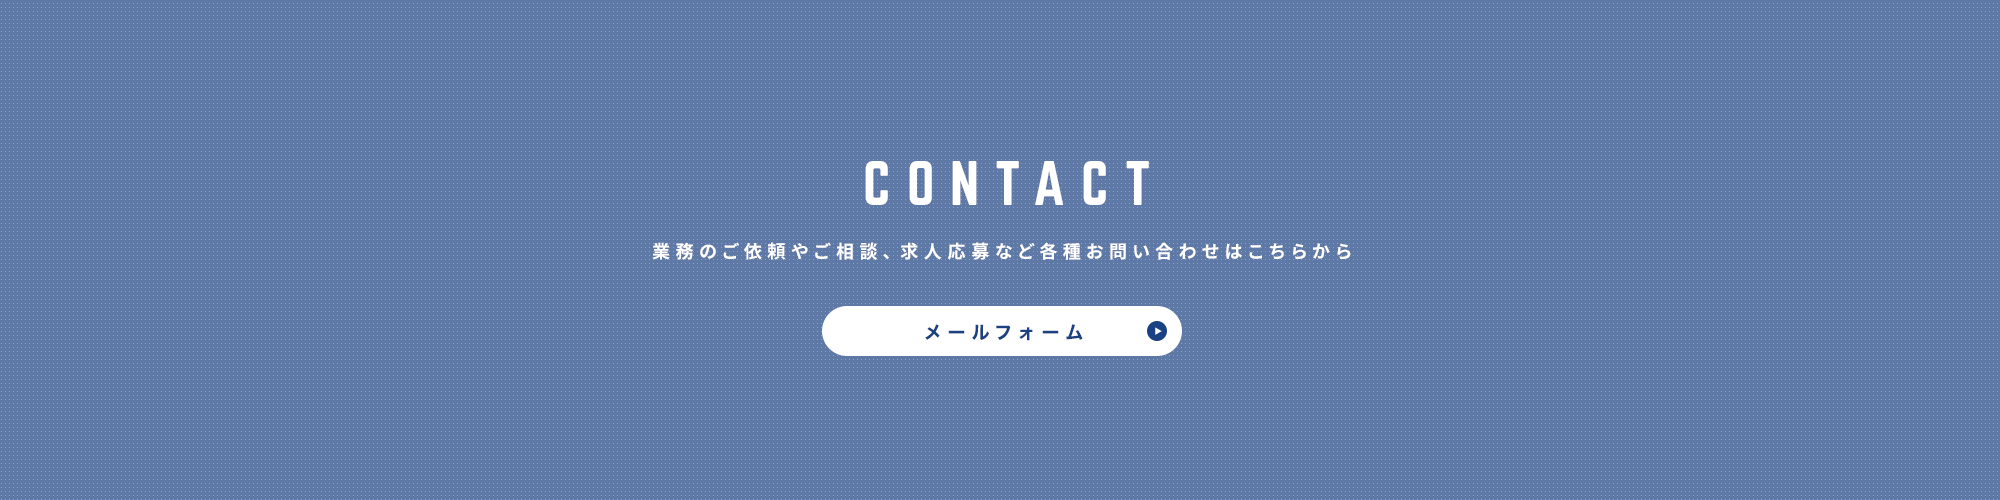 banner_contact_off